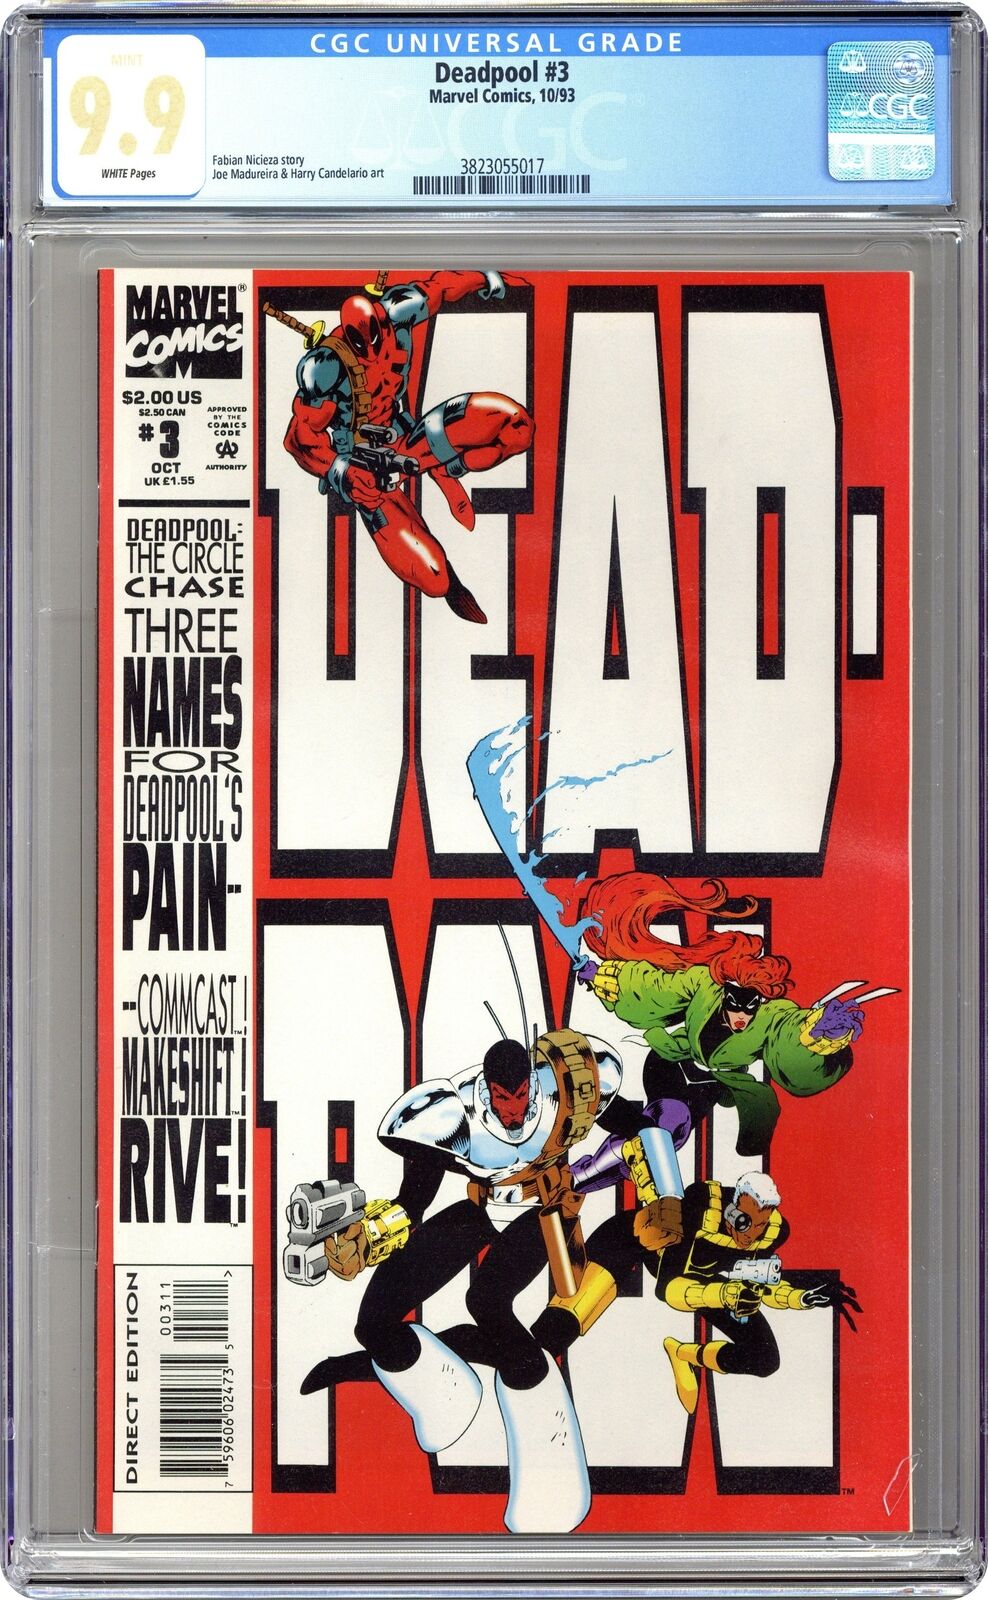 Deadpool The Circle Chase #3 CGC 9.9 1993 3823055017